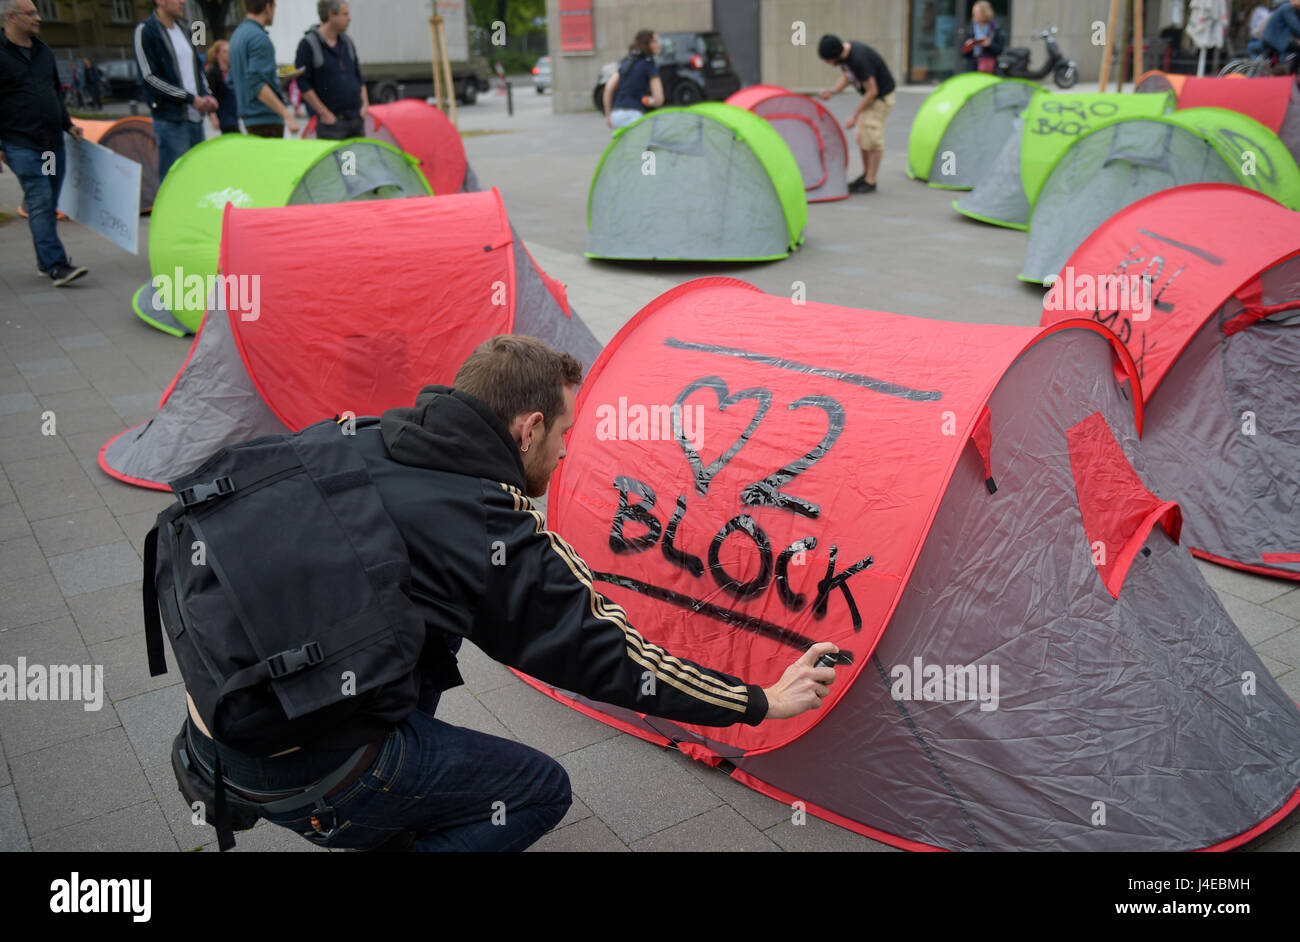 Hamburg, Germany. 13th May, 2017. G20 opponents can be seen on the Karolinen Plaza which is filled with tents in Hamburg, Germany, 13 May 2017. Organizers of the G20 protest camp pitched a temporary tent camp in order to protest for the freedom of assmebly during the G20 summit. Photo: Axel Heimken/dpa/Alamy Live News Stock Photo